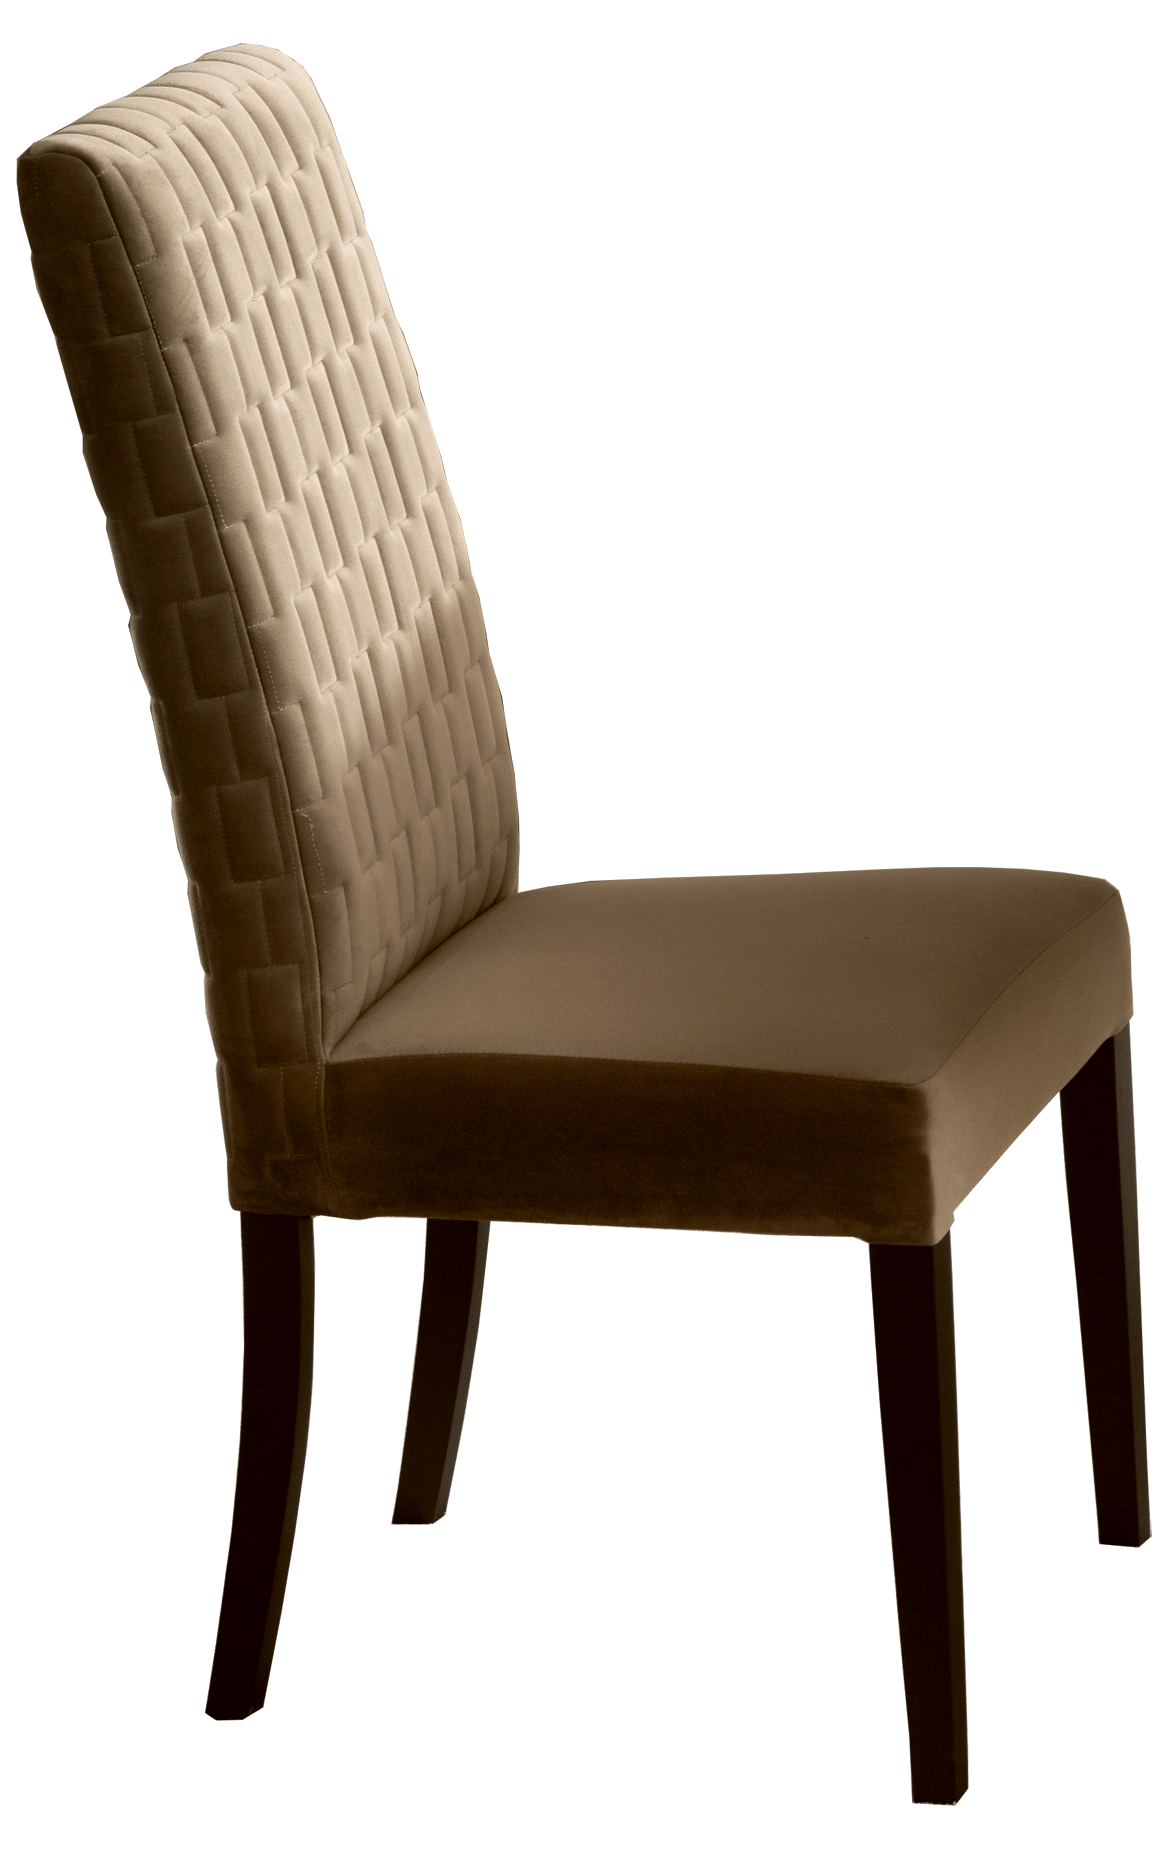 Brands Camel Classic Collection, Italy Poesia Dining Chair by Arredoclassic